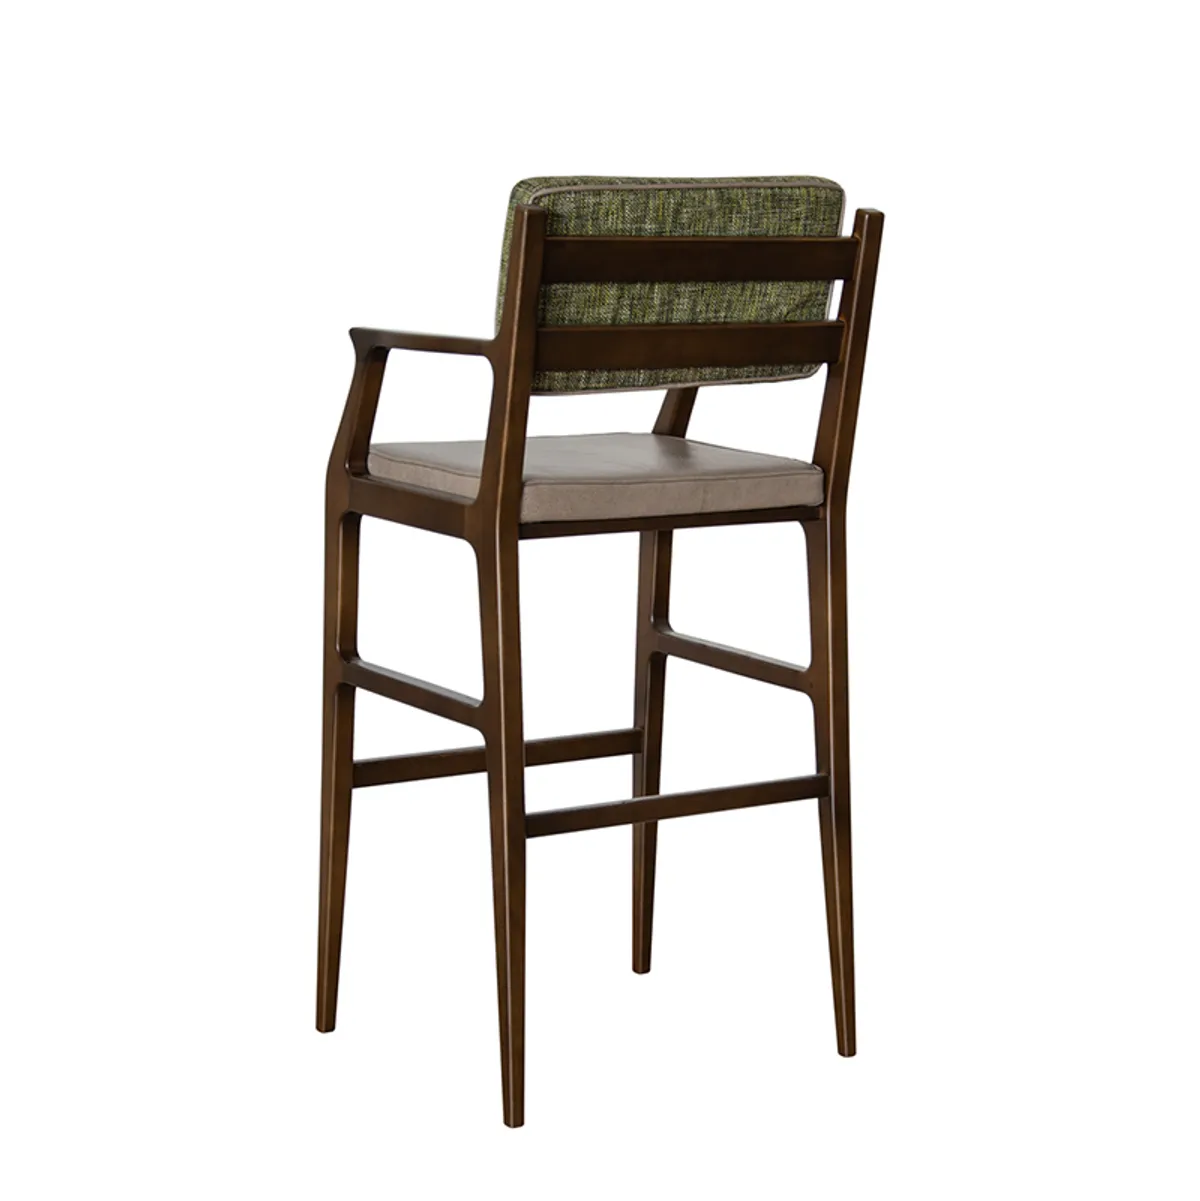 Linden Bar Stool Wooden Frame Stool For Bars And Hotels13